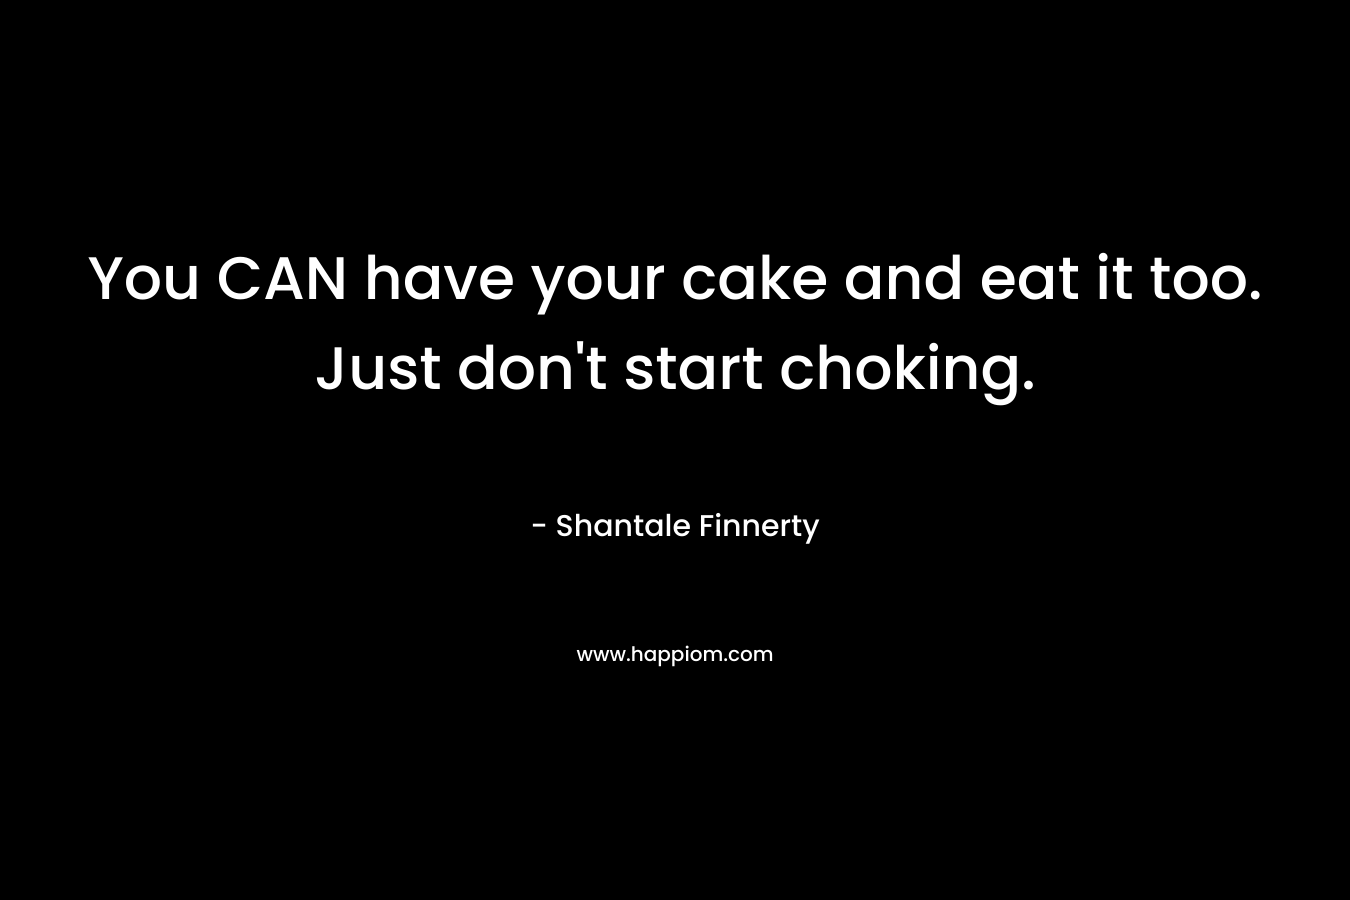 You CAN have your cake and eat it too. Just don’t start choking. – Shantale Finnerty